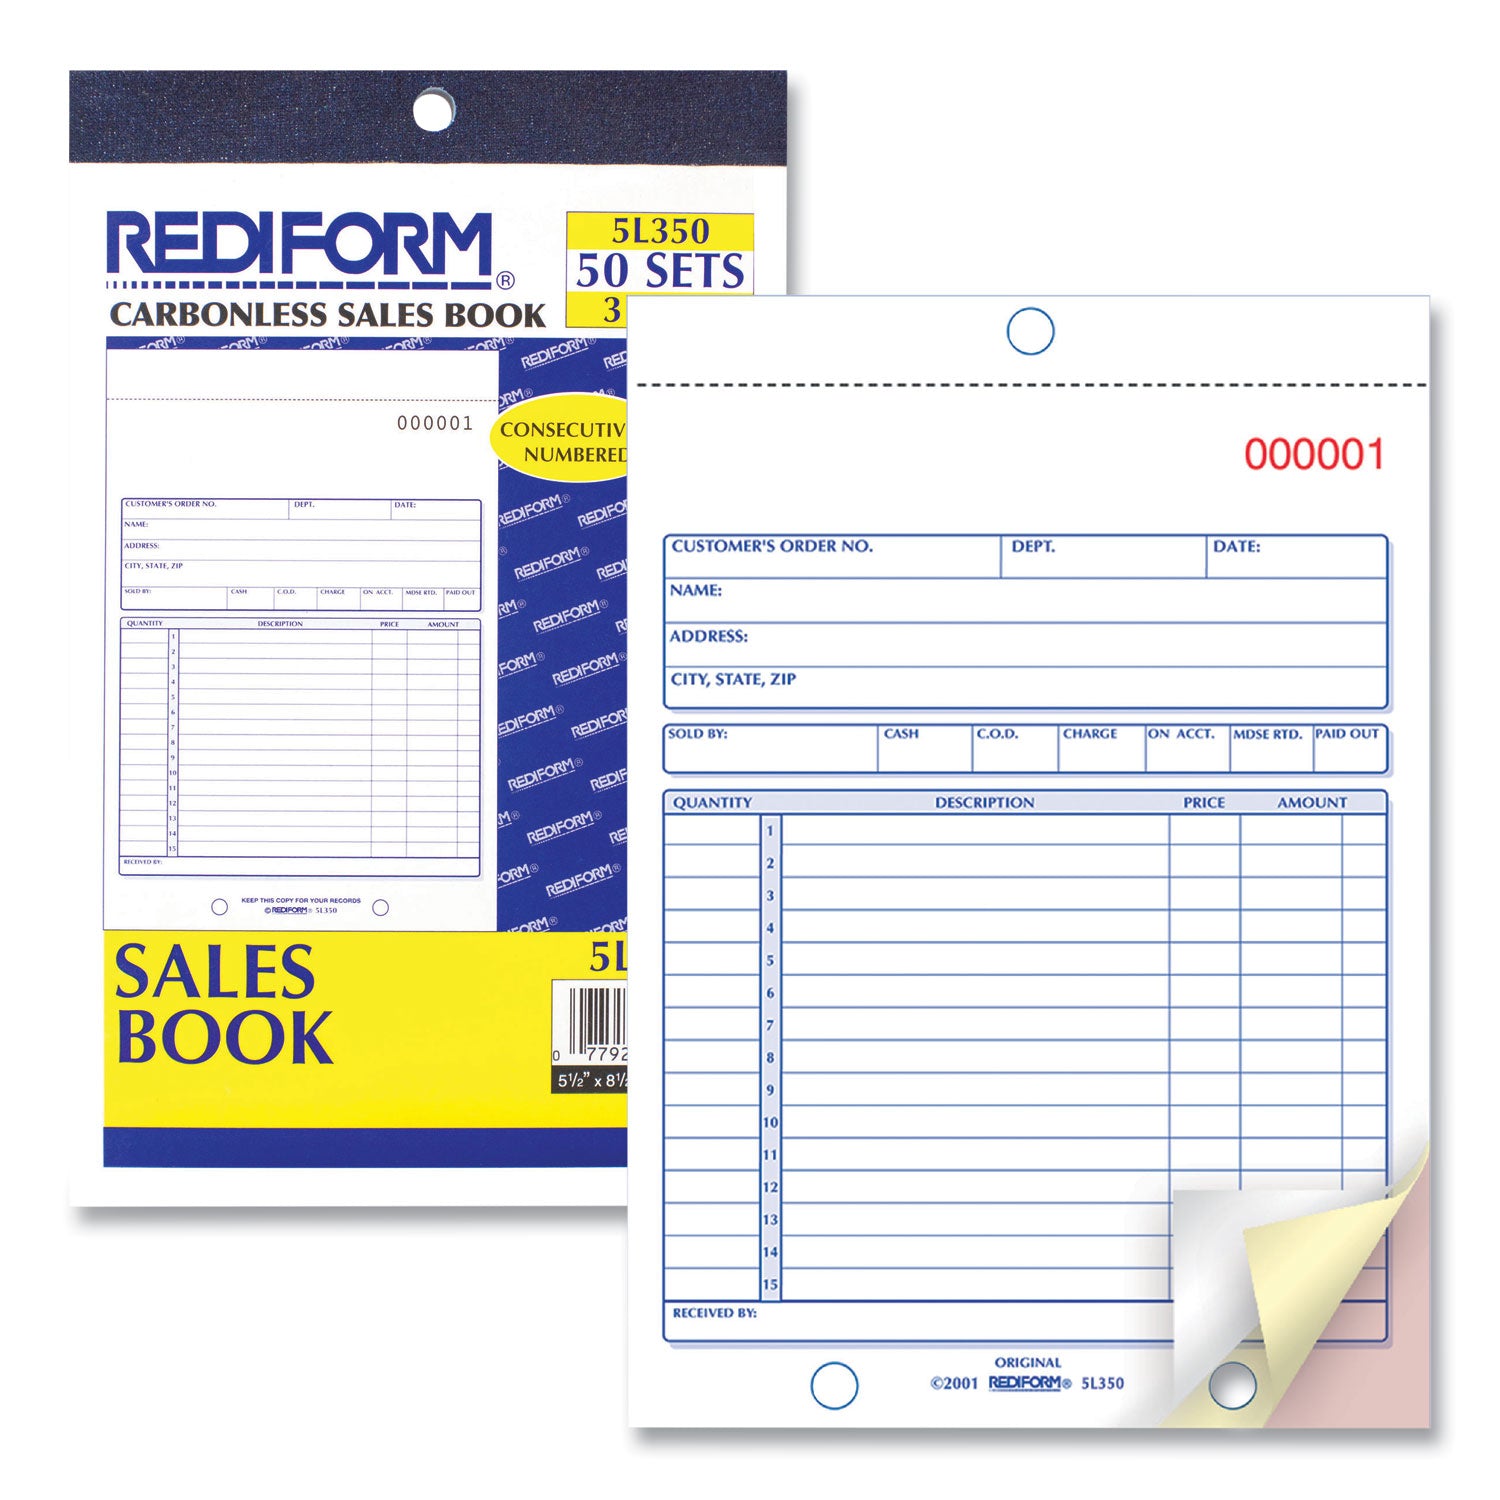 Sales Book, 15 Lines, Three-Part Carbonless, 5.5 x 7.88, 50 Forms Total - 